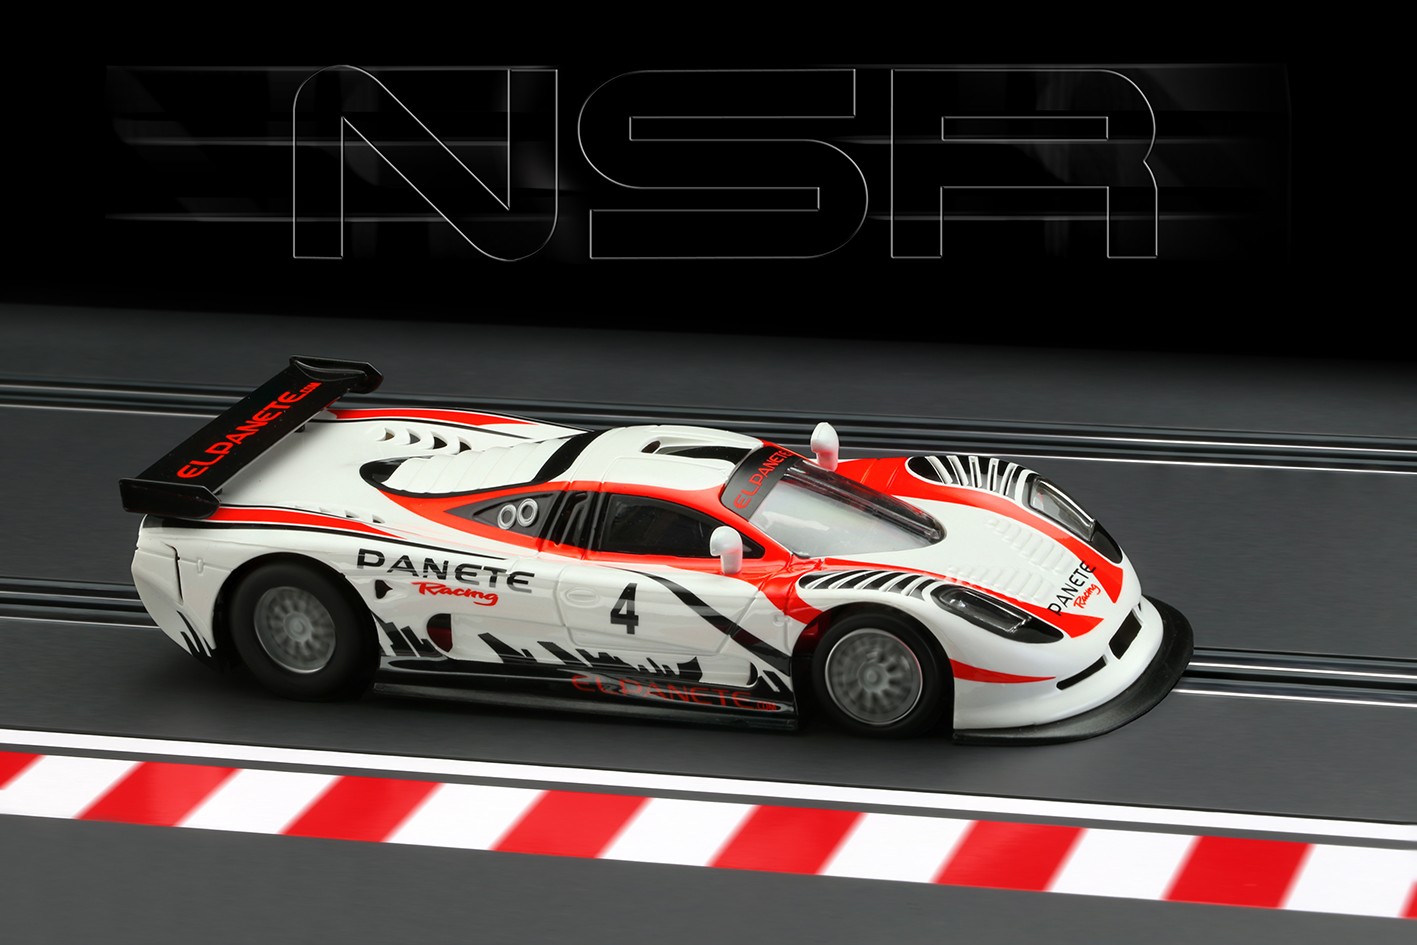 NSR - Mosler MT900R Panete Racing - Red #4, 0138SW-EVO3